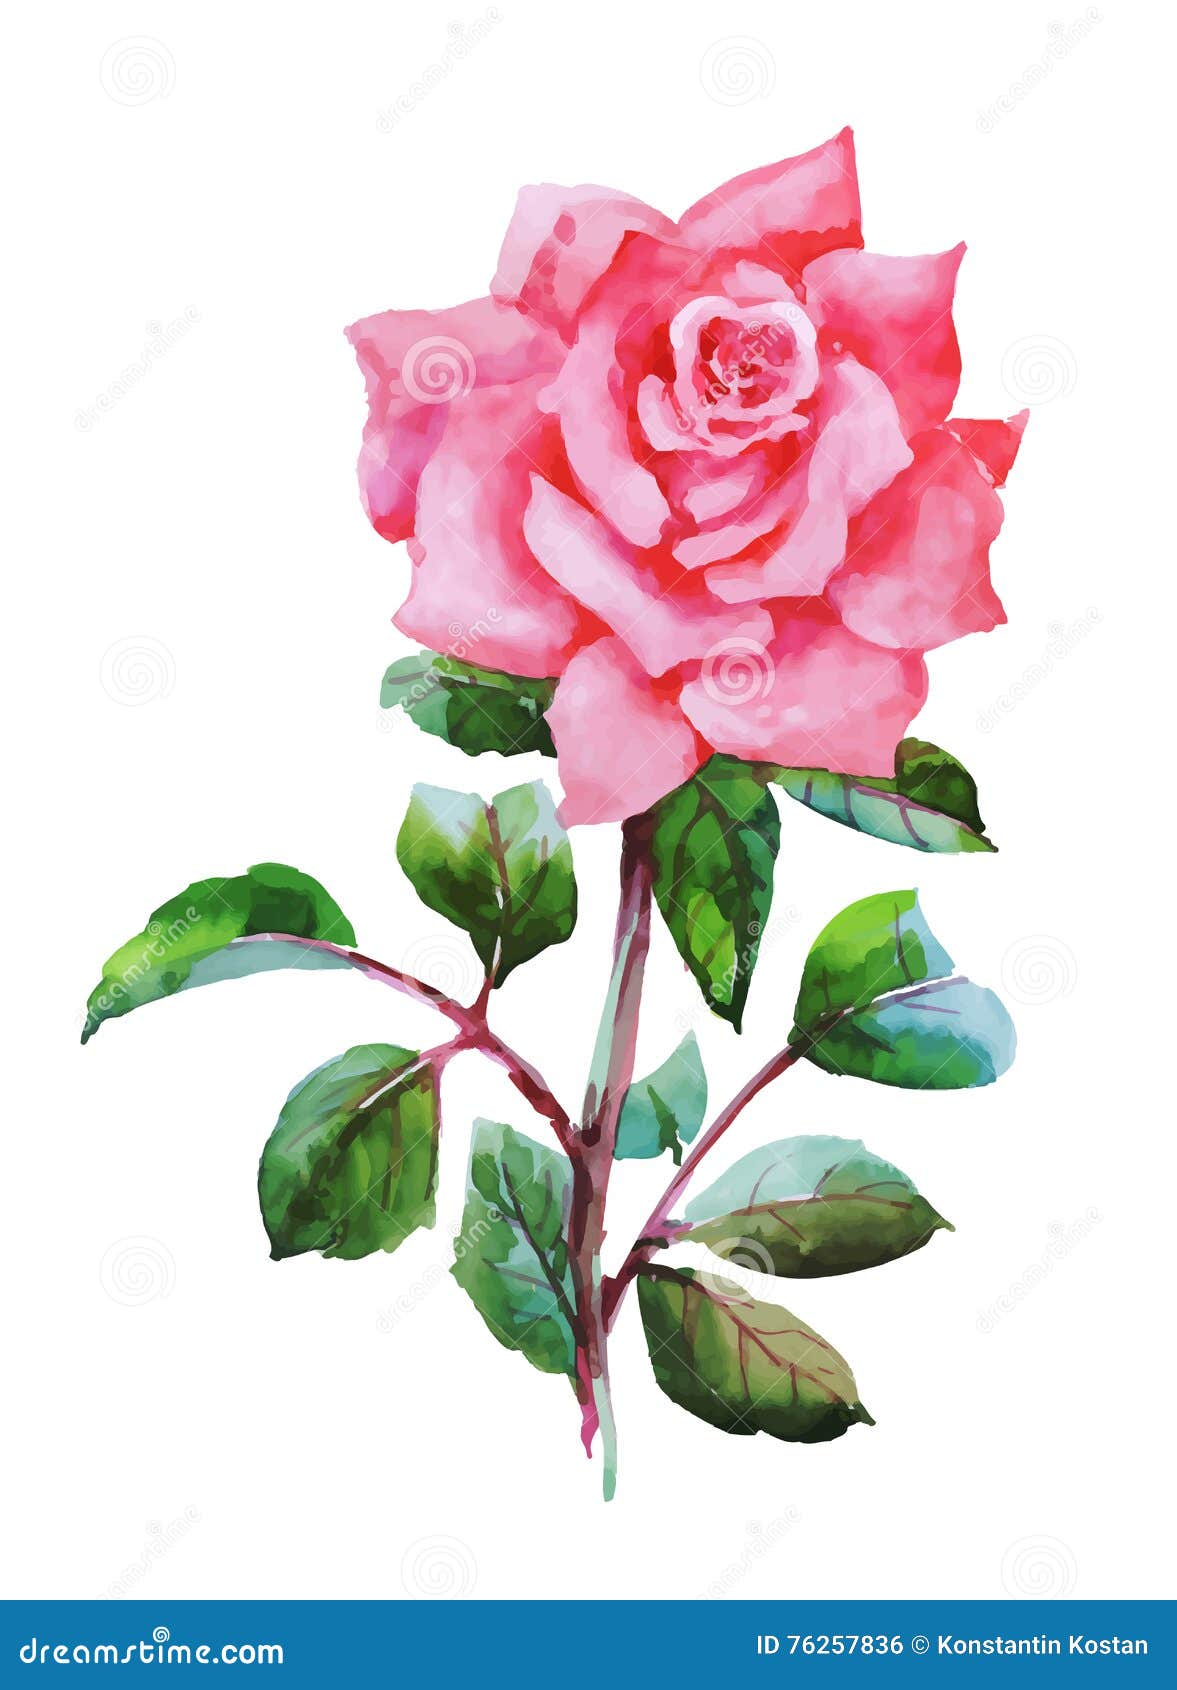 Watercolor Garden Blooming Red Roses Illustration on White Background ...